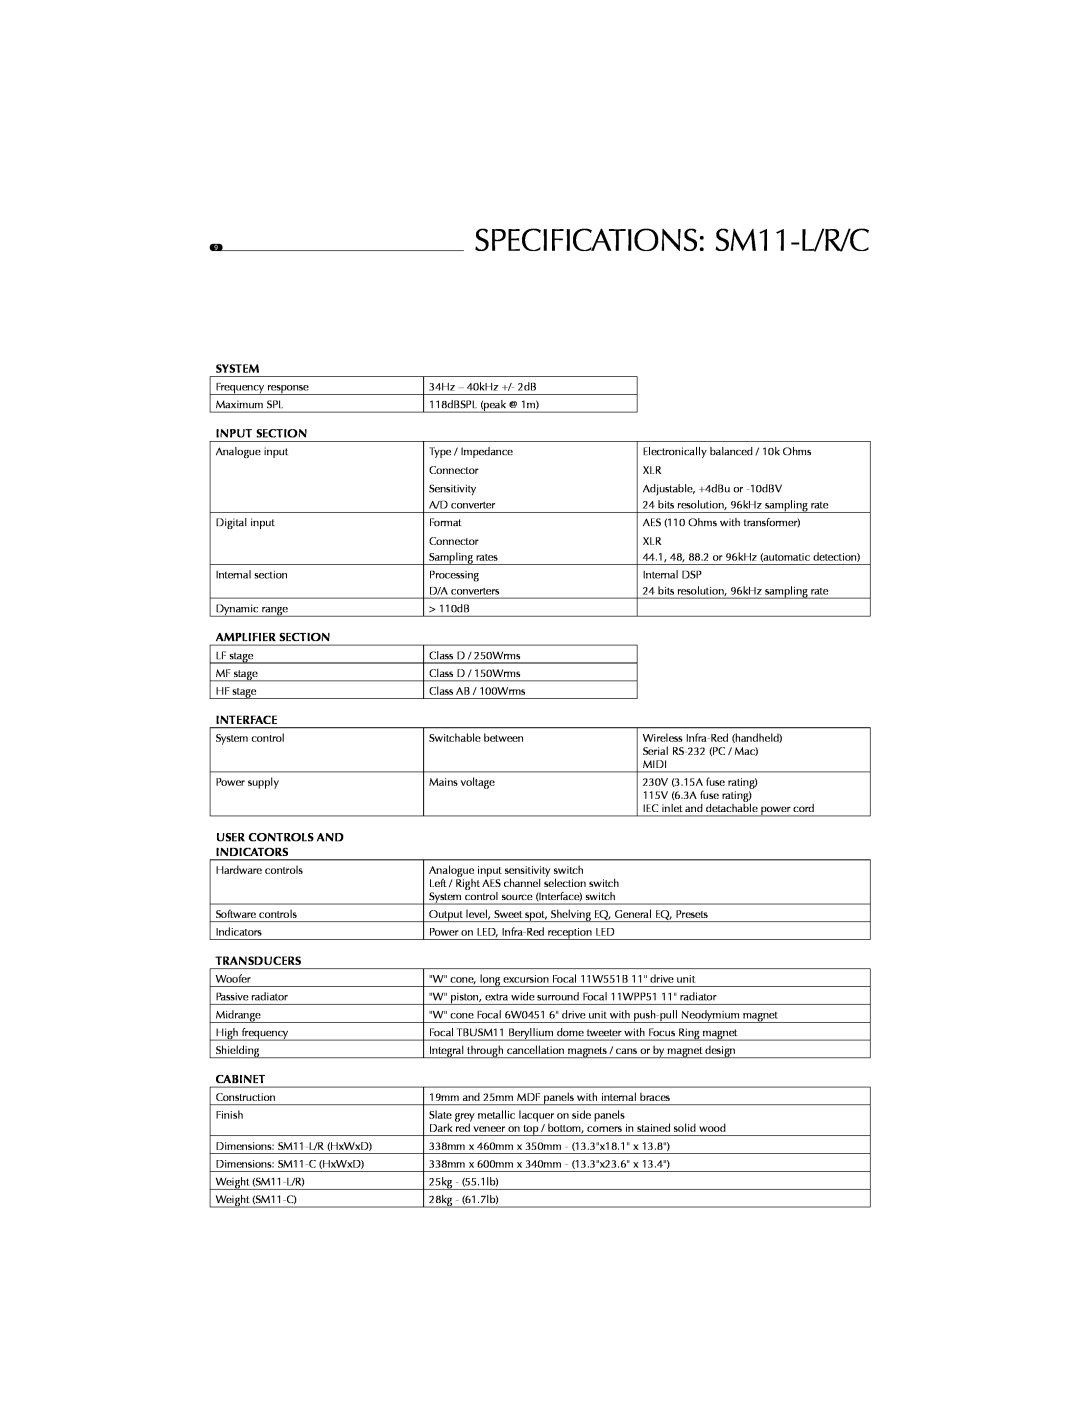 Focal SPECIFICATIONS SM11-L/R/C, System, Input Section, Amplifier Section, Interface, User Controls And Indicators 